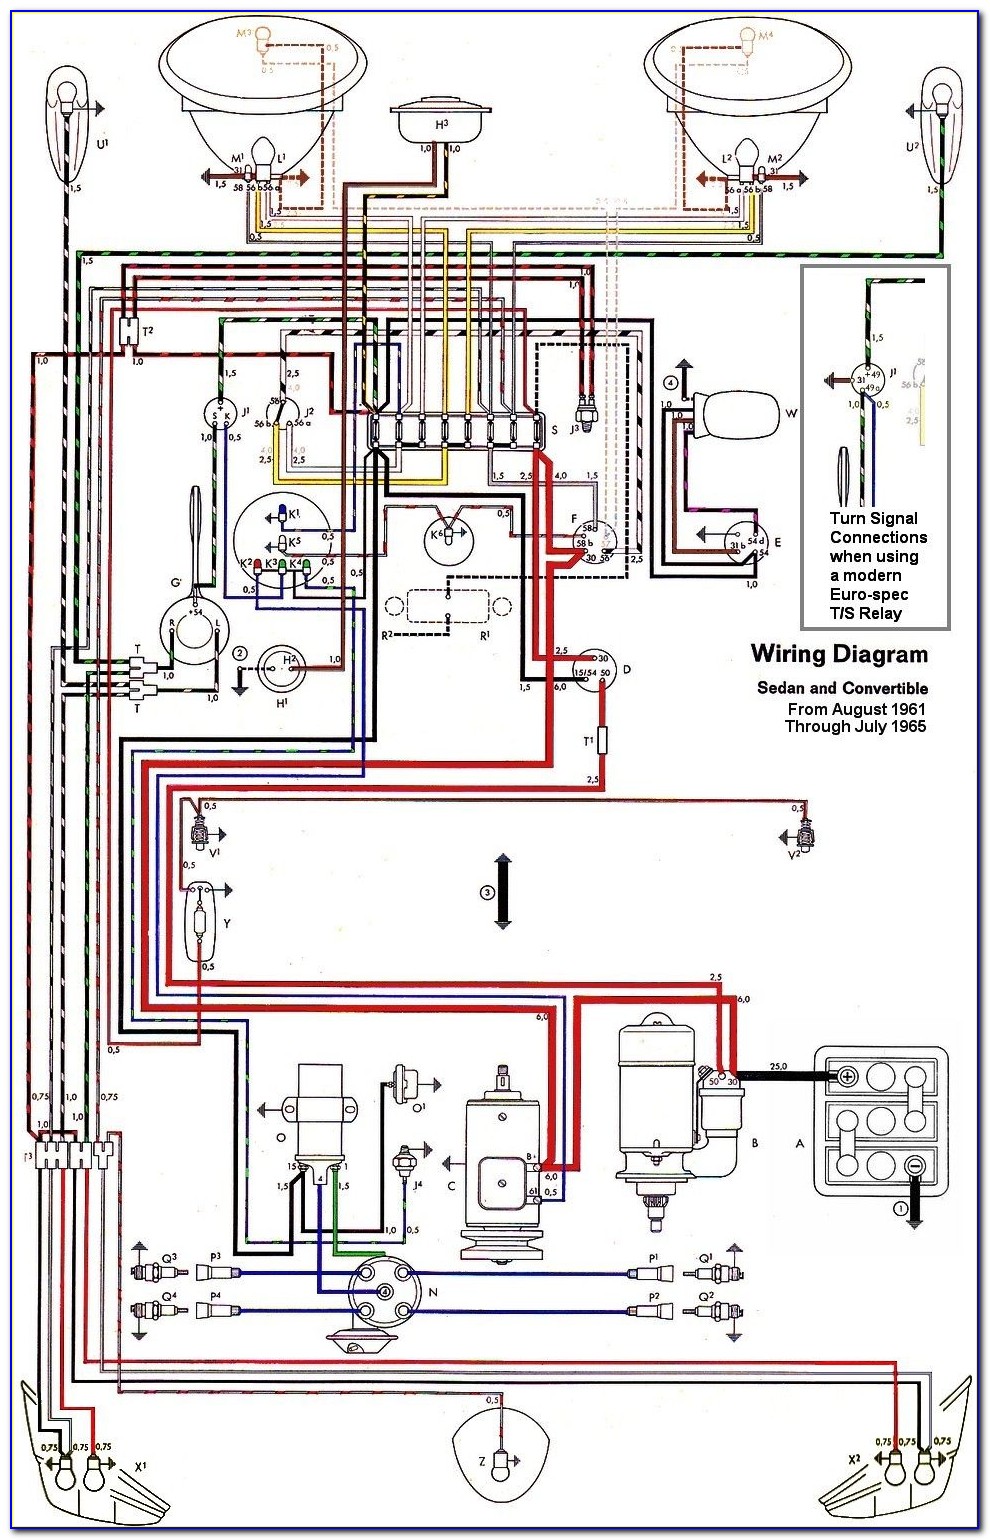 1969 Vw Beetle Ignition Switch Wiring Diagram